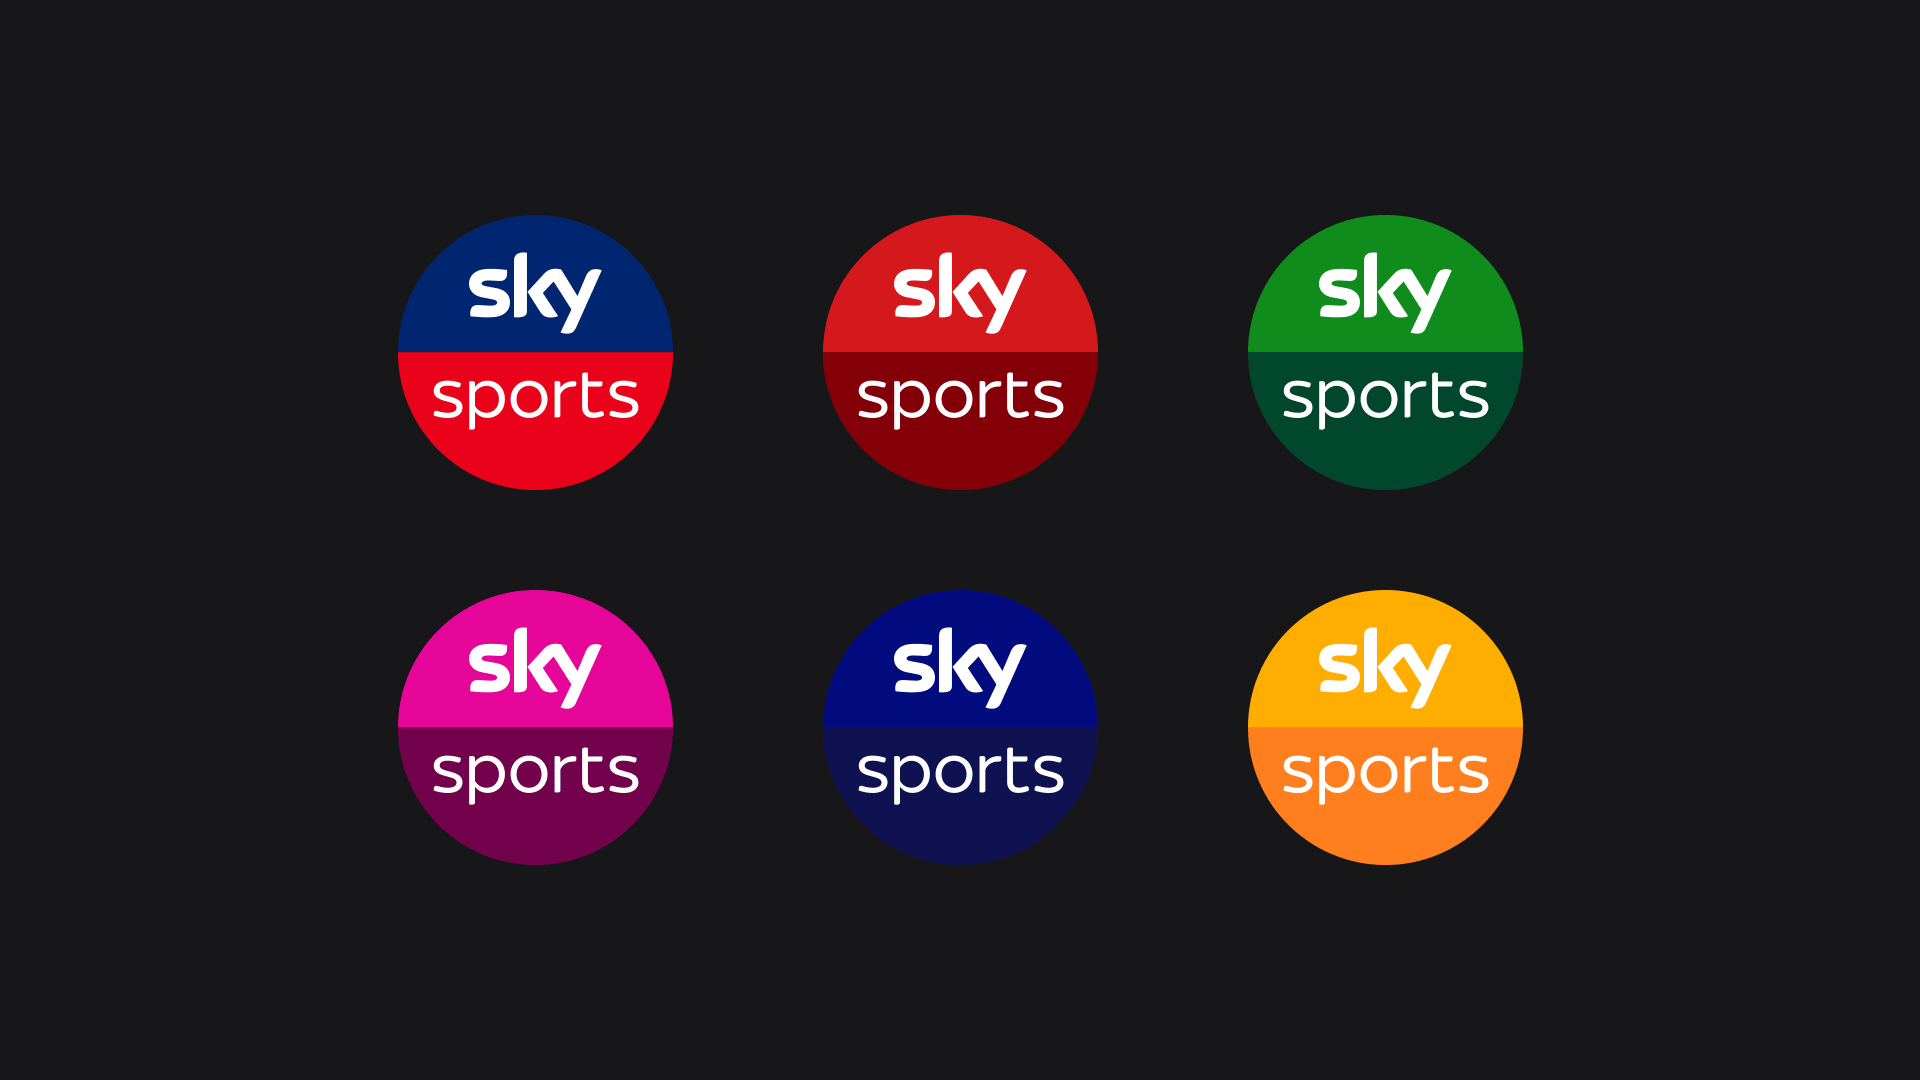 Sky Sports Revamps the Look With a New Logo and Theme